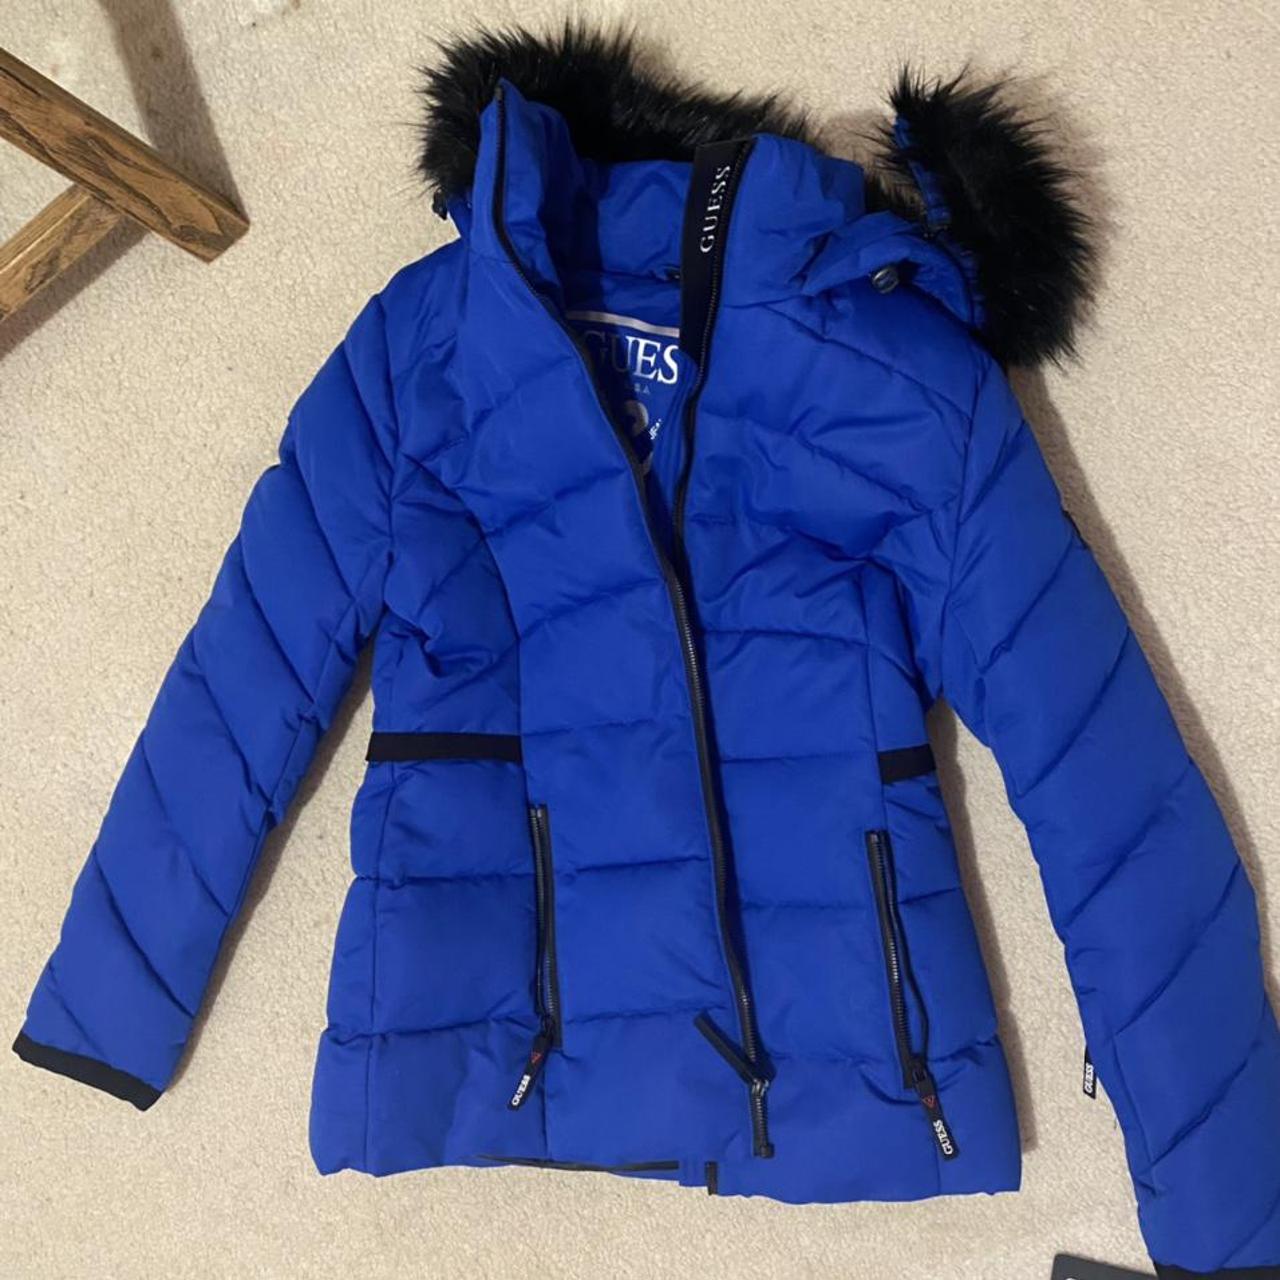 Gorgeous blue Guess winter jacket size medium with... - Depop